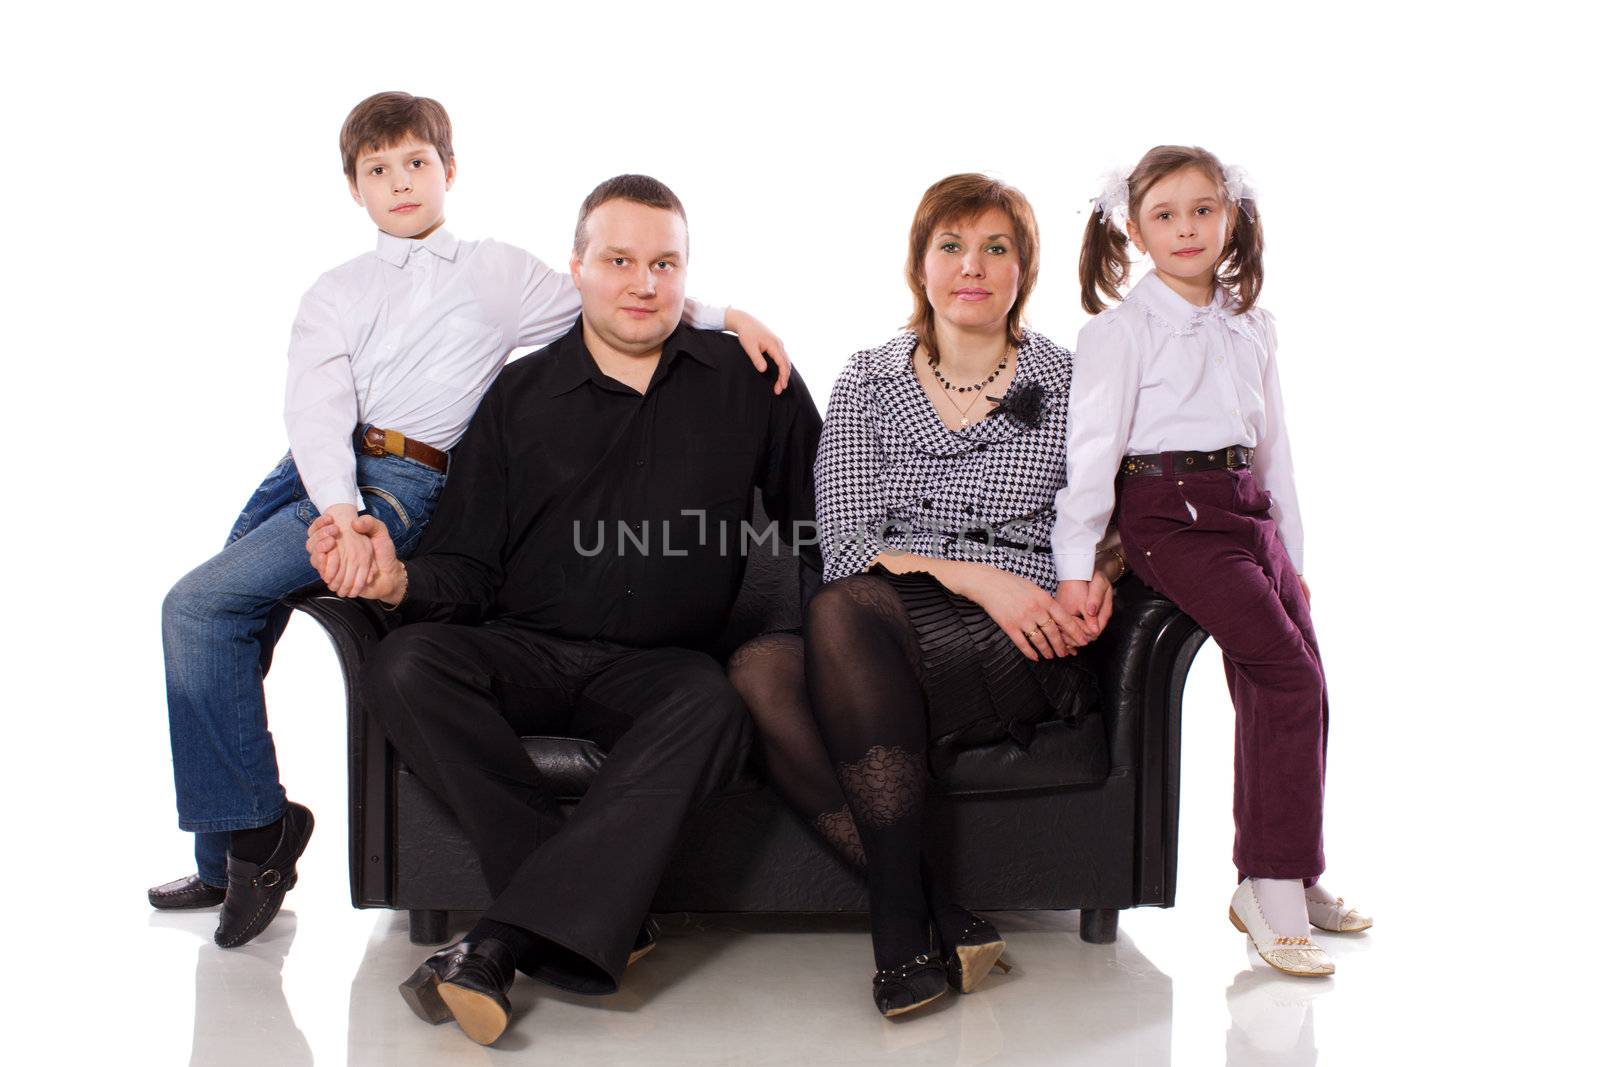 Happy Family posing together isolated on white